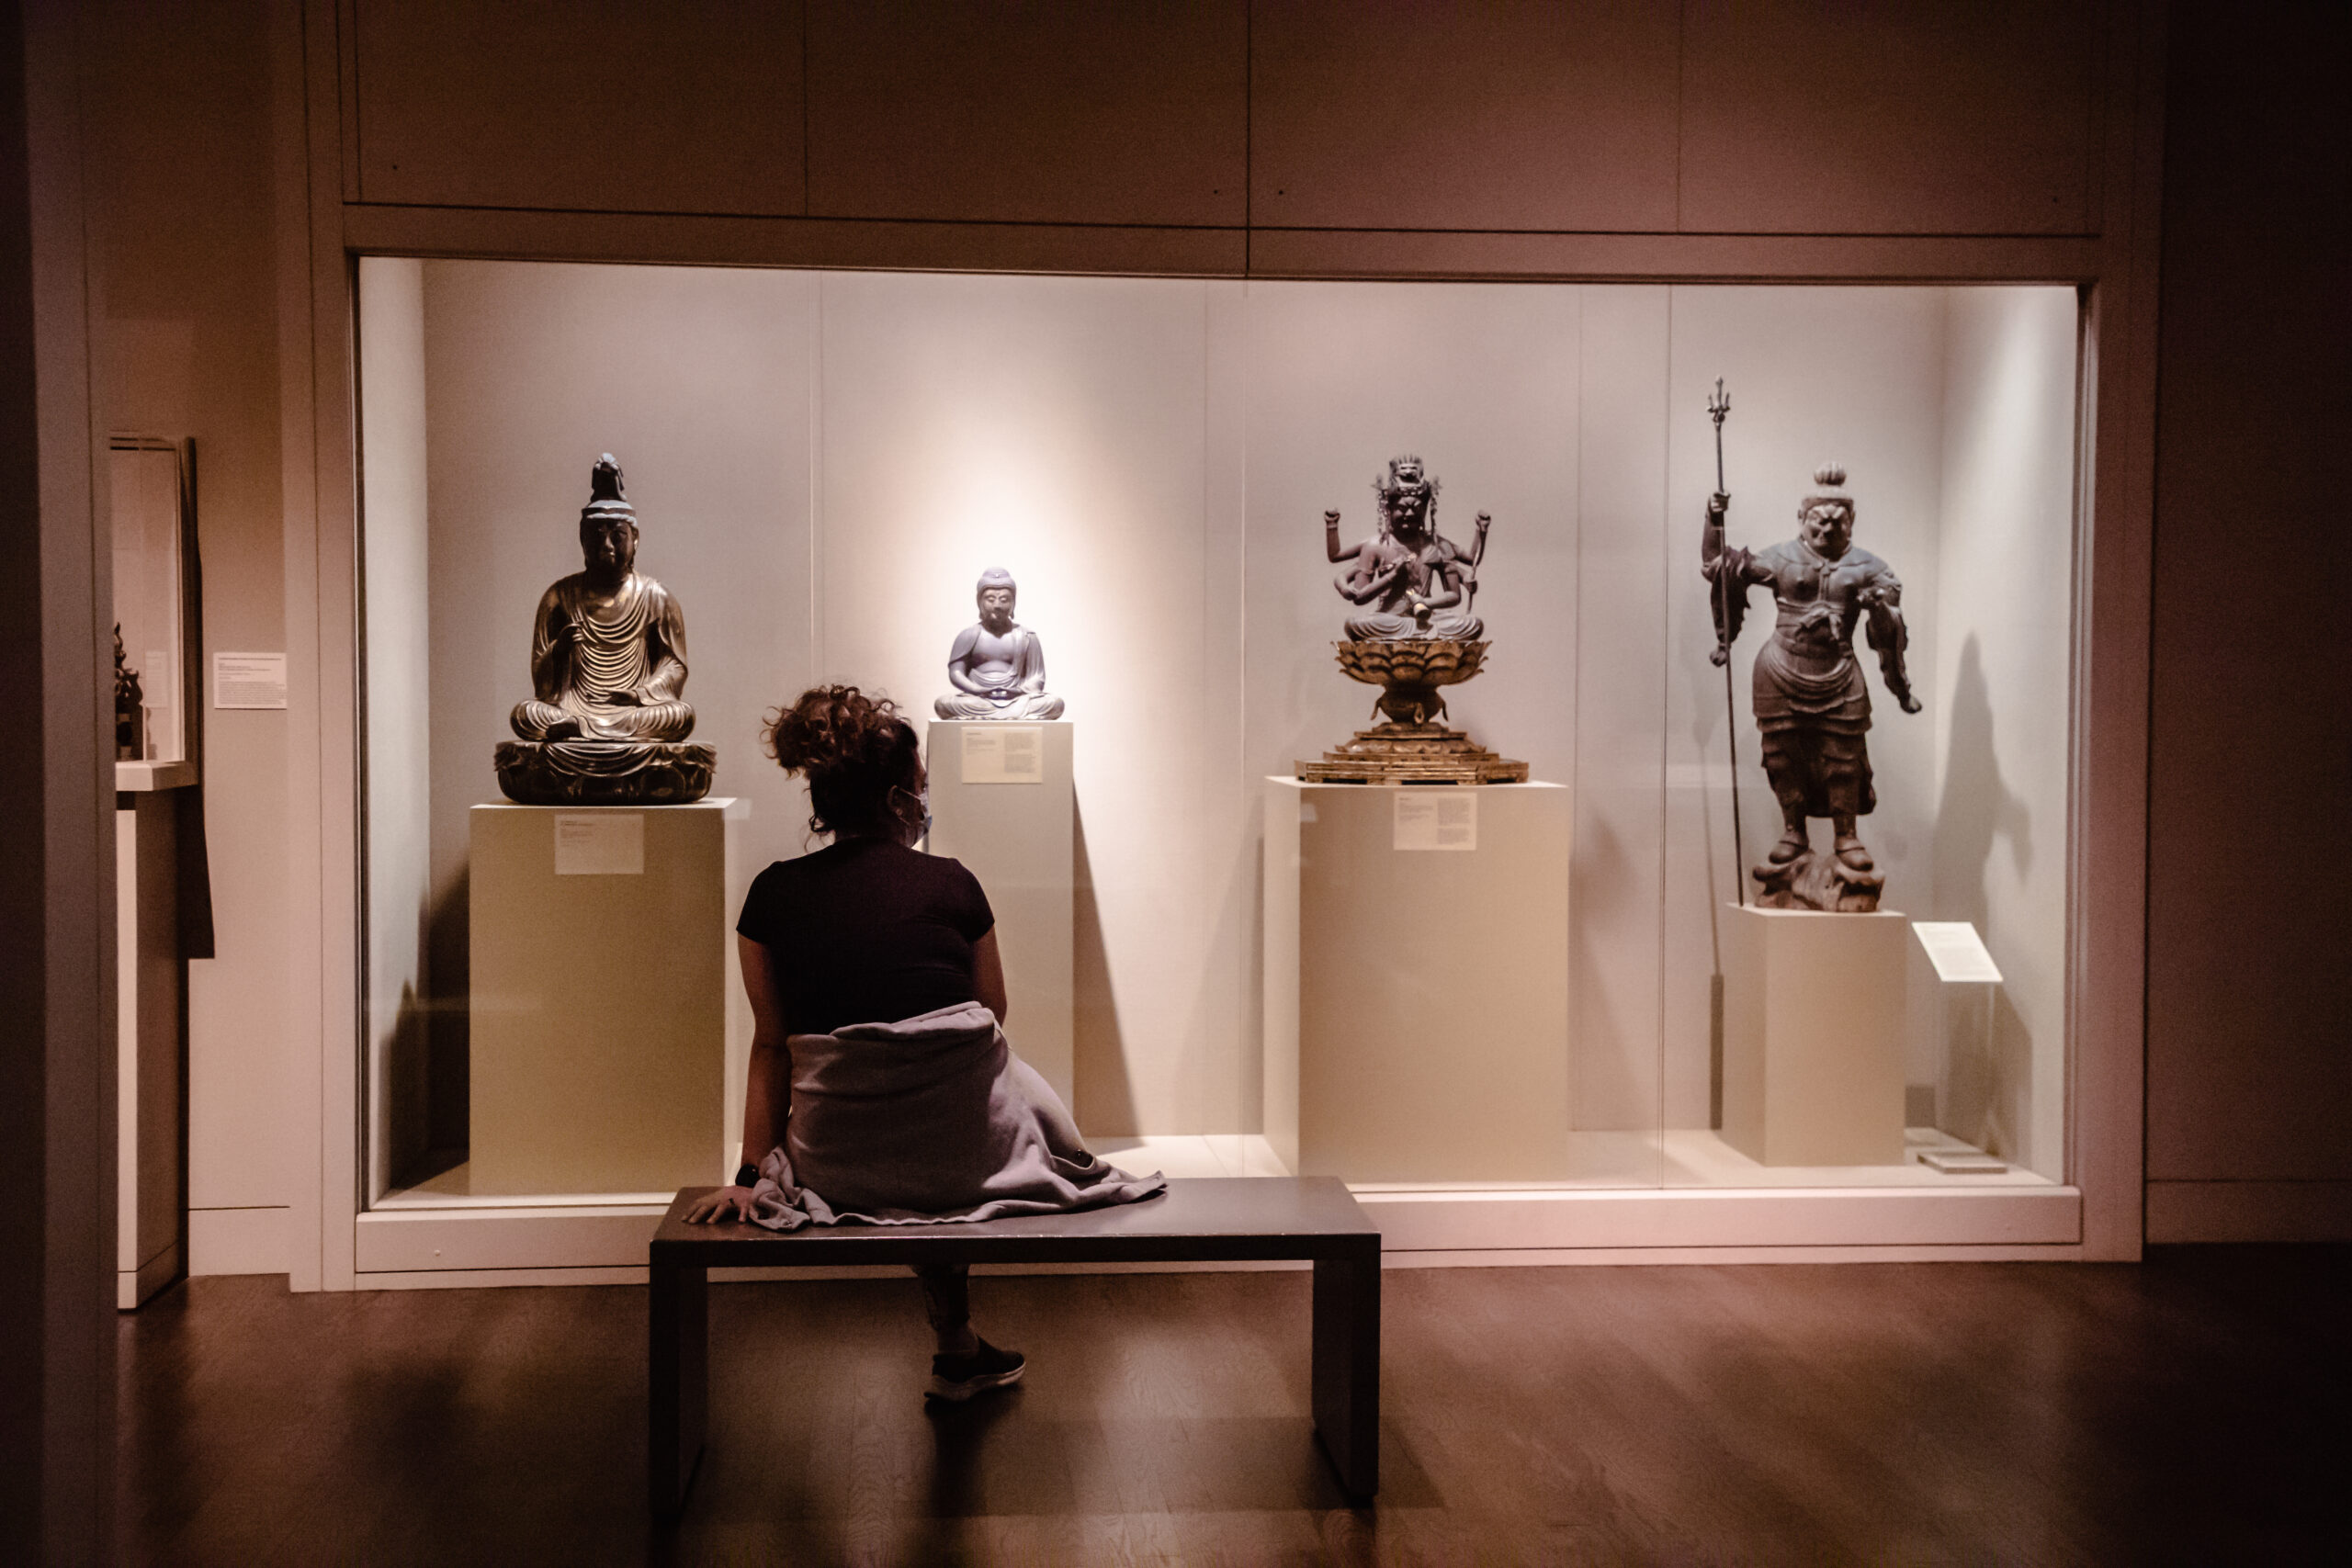 Asian Art Collection at the San Antonio Museum of Art